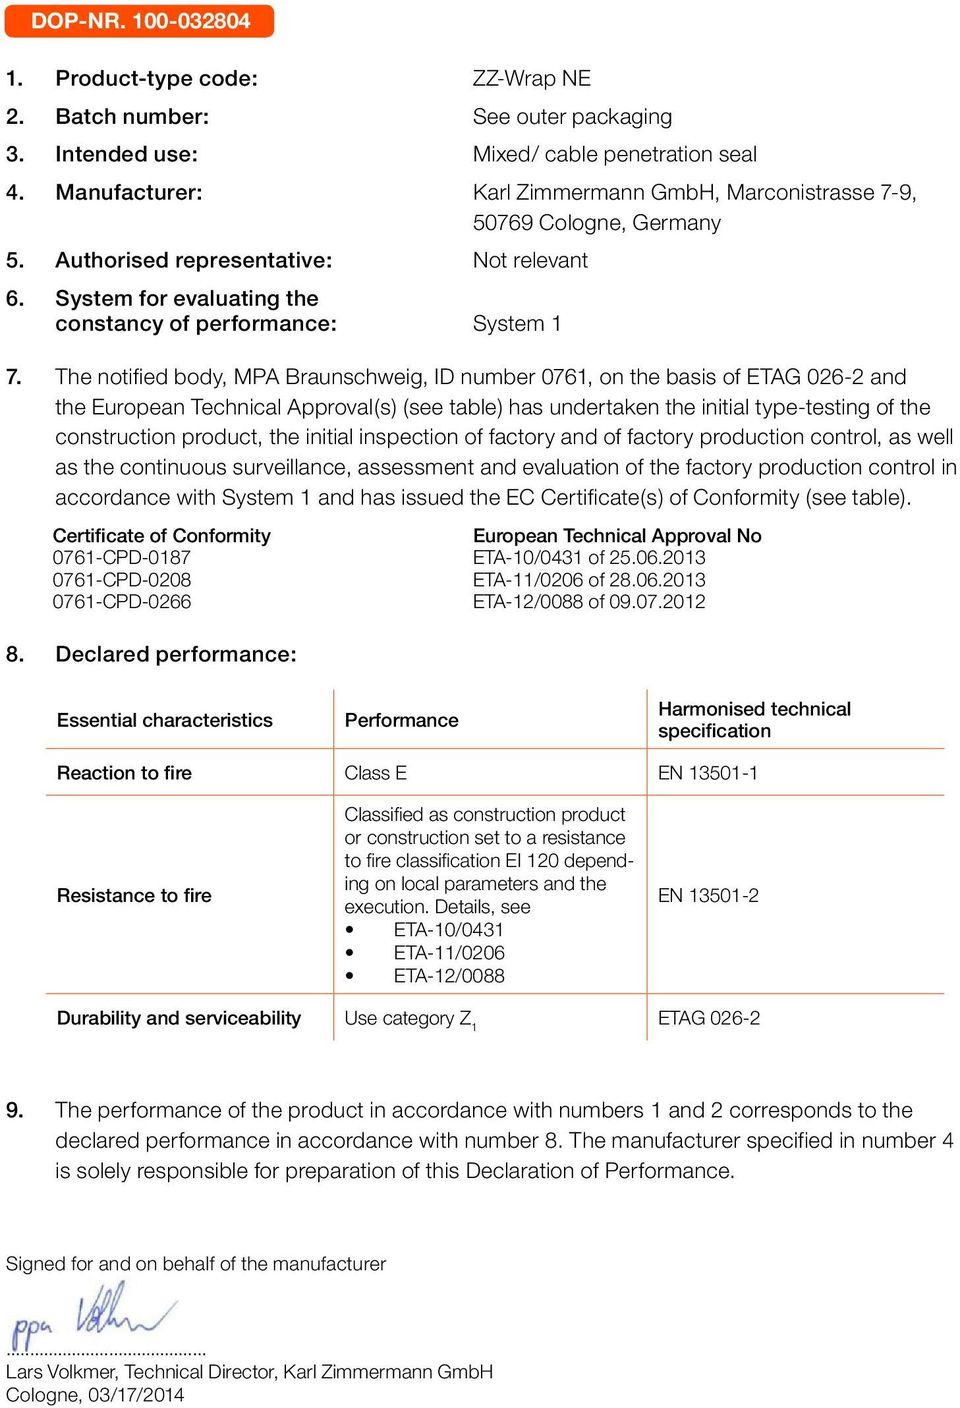 The notified body, MPA Braunschweig, ID number 0761, on the basis of and the European Technical Approval(s) (see table) has undertaken the initial type-testing of the construction product, the